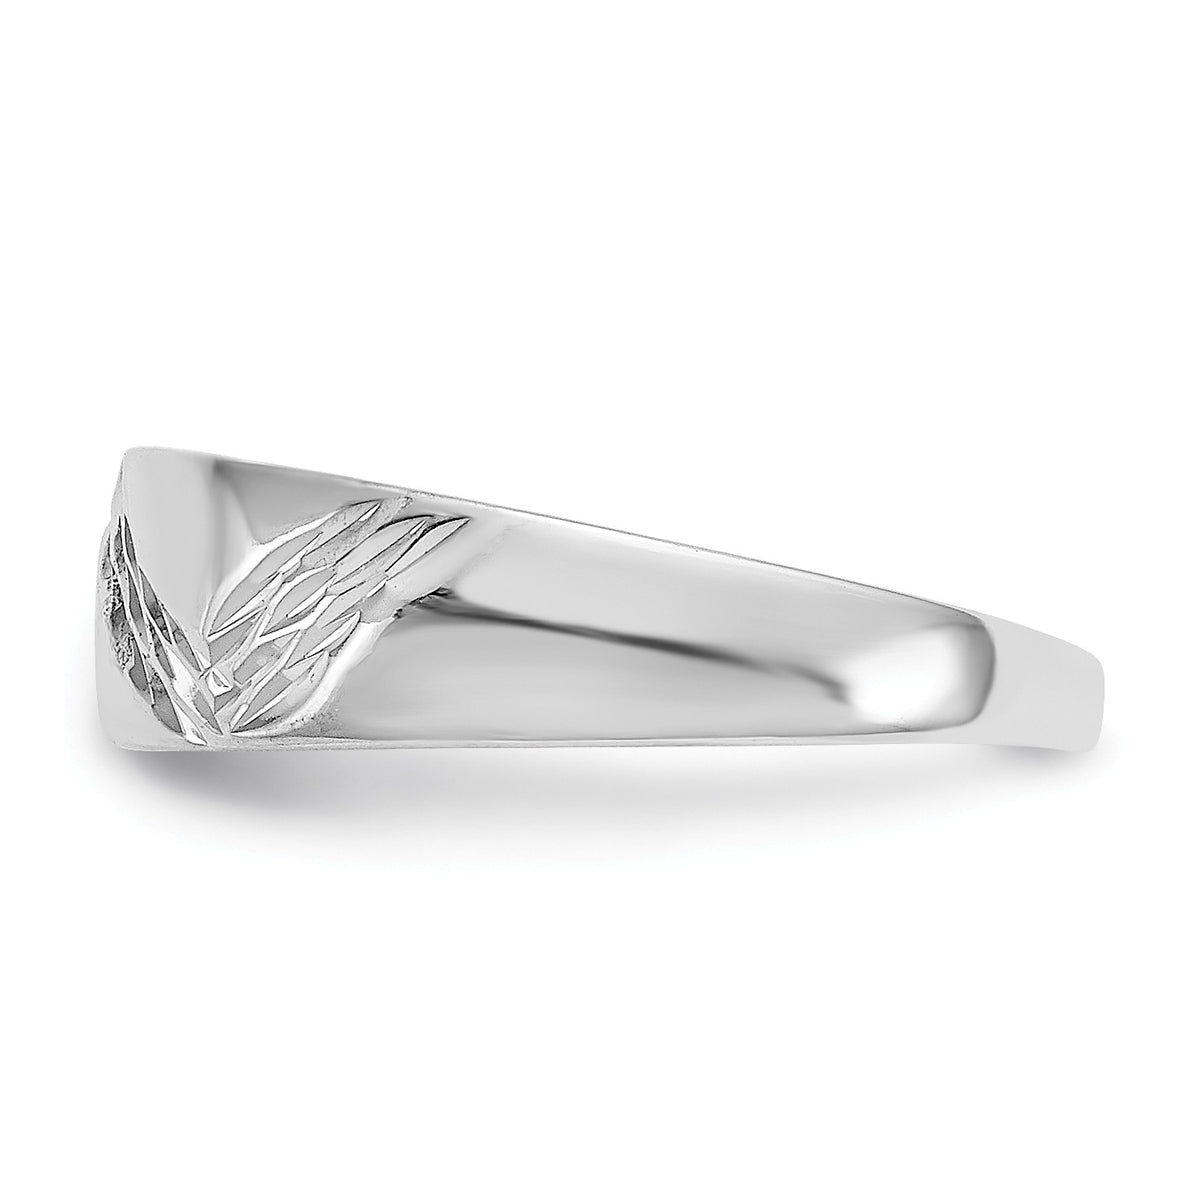 Alternate view of the Diamond-Cut Toe Ring in 14 Karat White Gold by The Black Bow Jewelry Co.